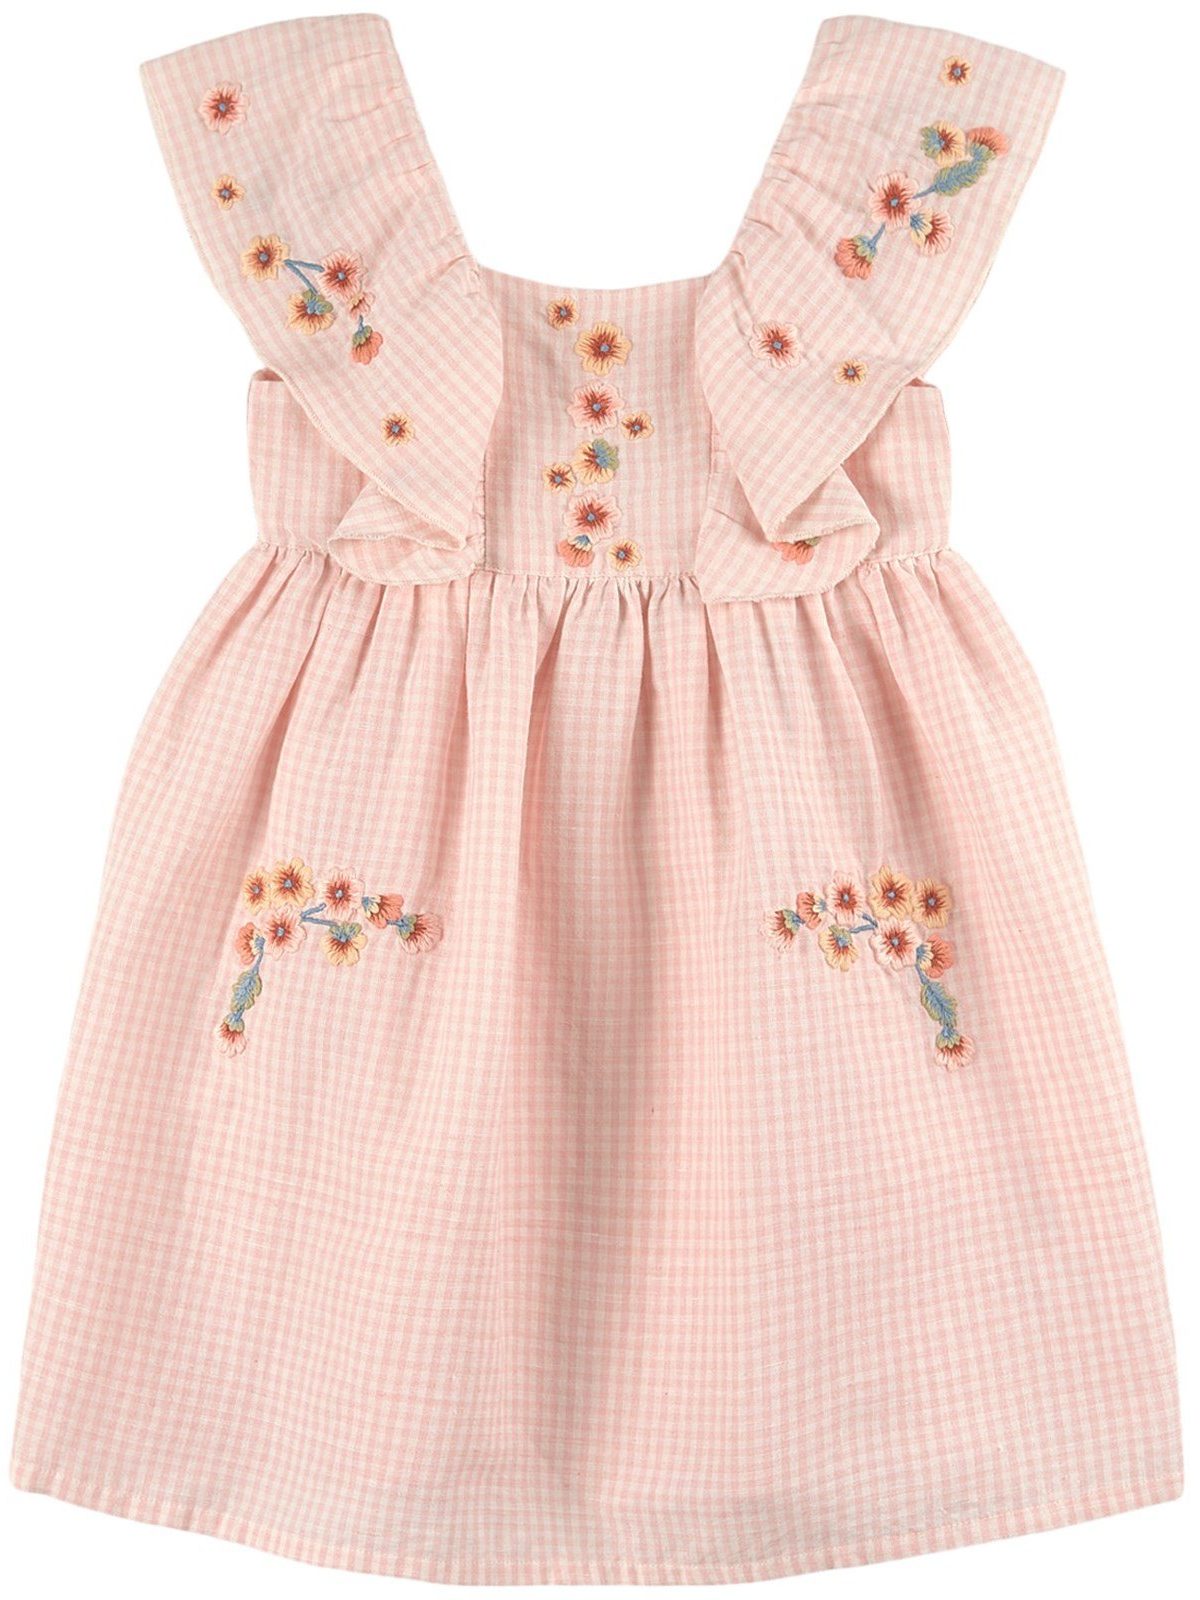 Floral Embroidered Gingham Ruffle Easter Dress